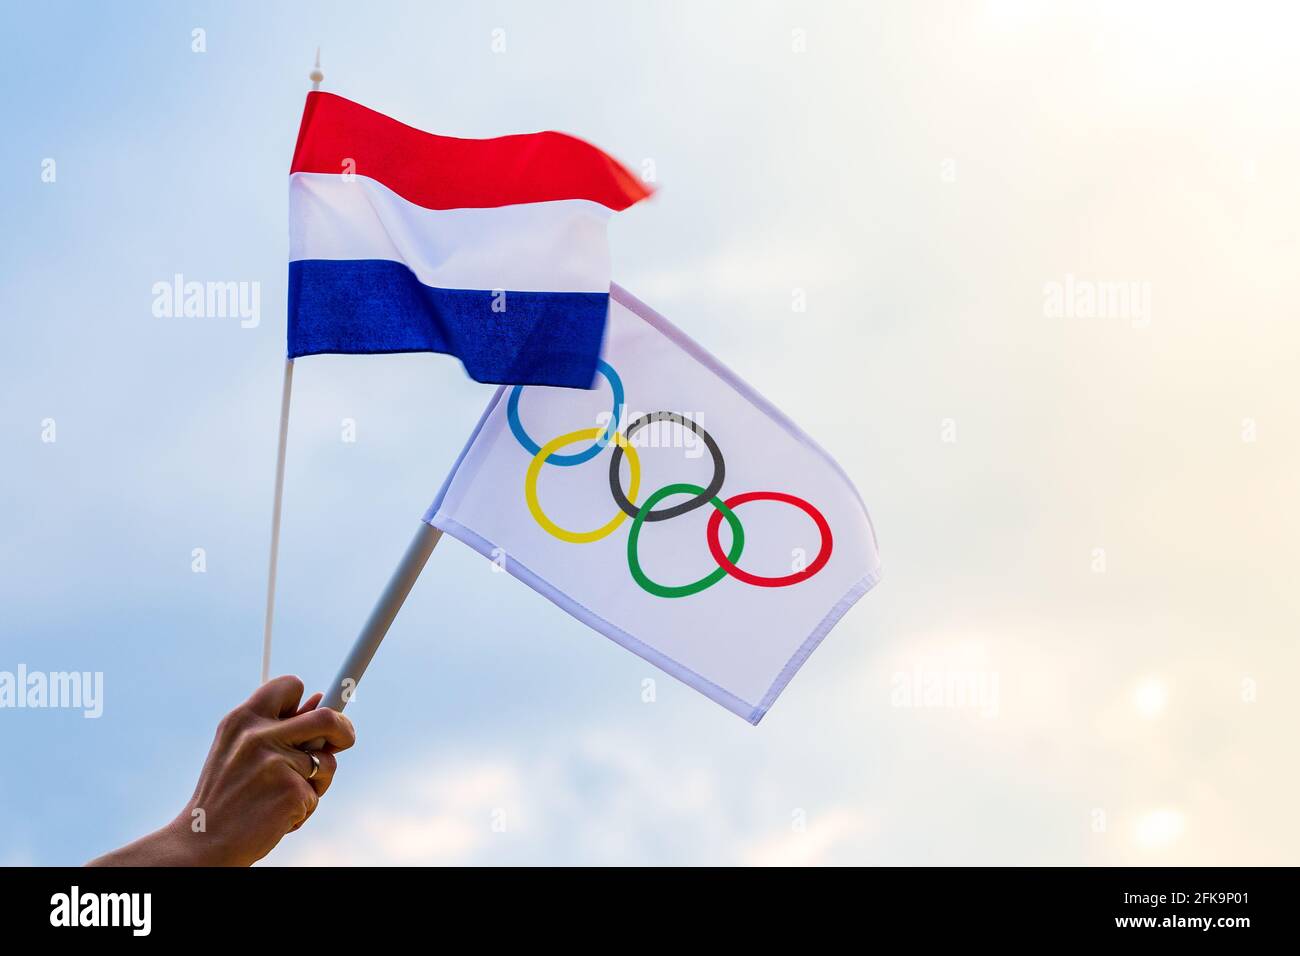 Fan waving the national flag of  Netherlands and the Olympic flag with symbol olympics rings. Stock Photo